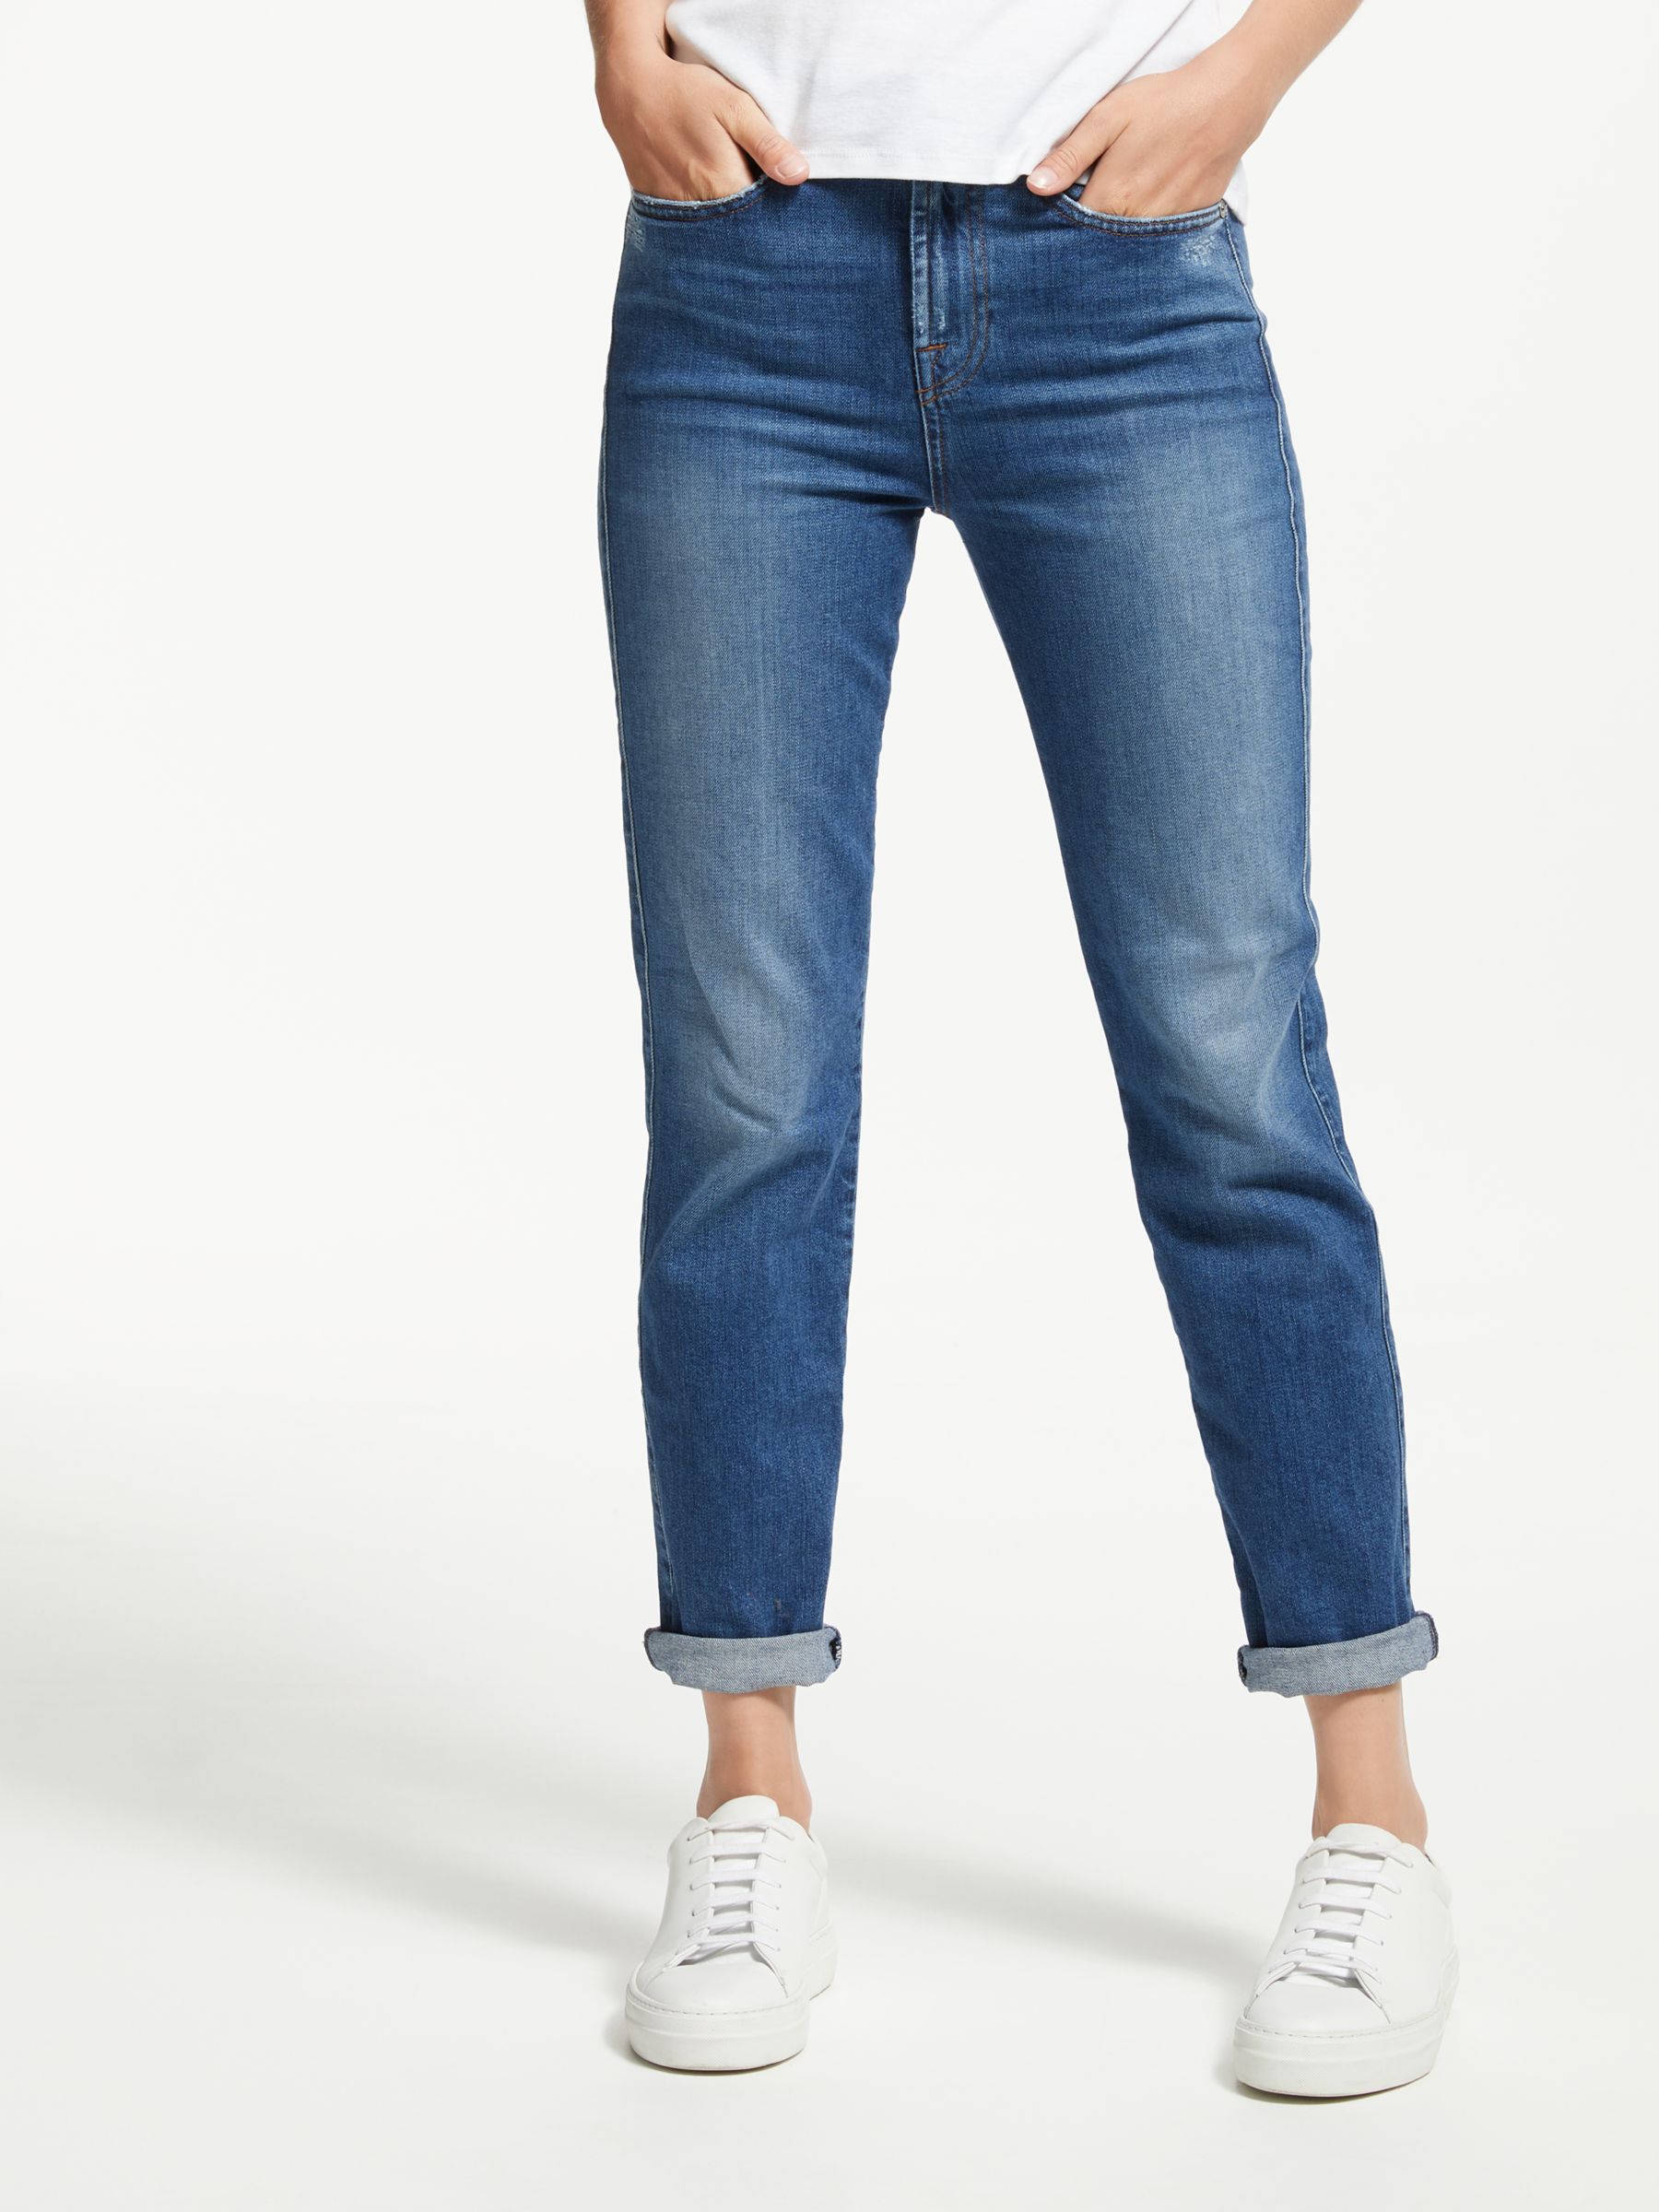 7 For All Mankind Erin High Waist Slim Jeans, Lounge